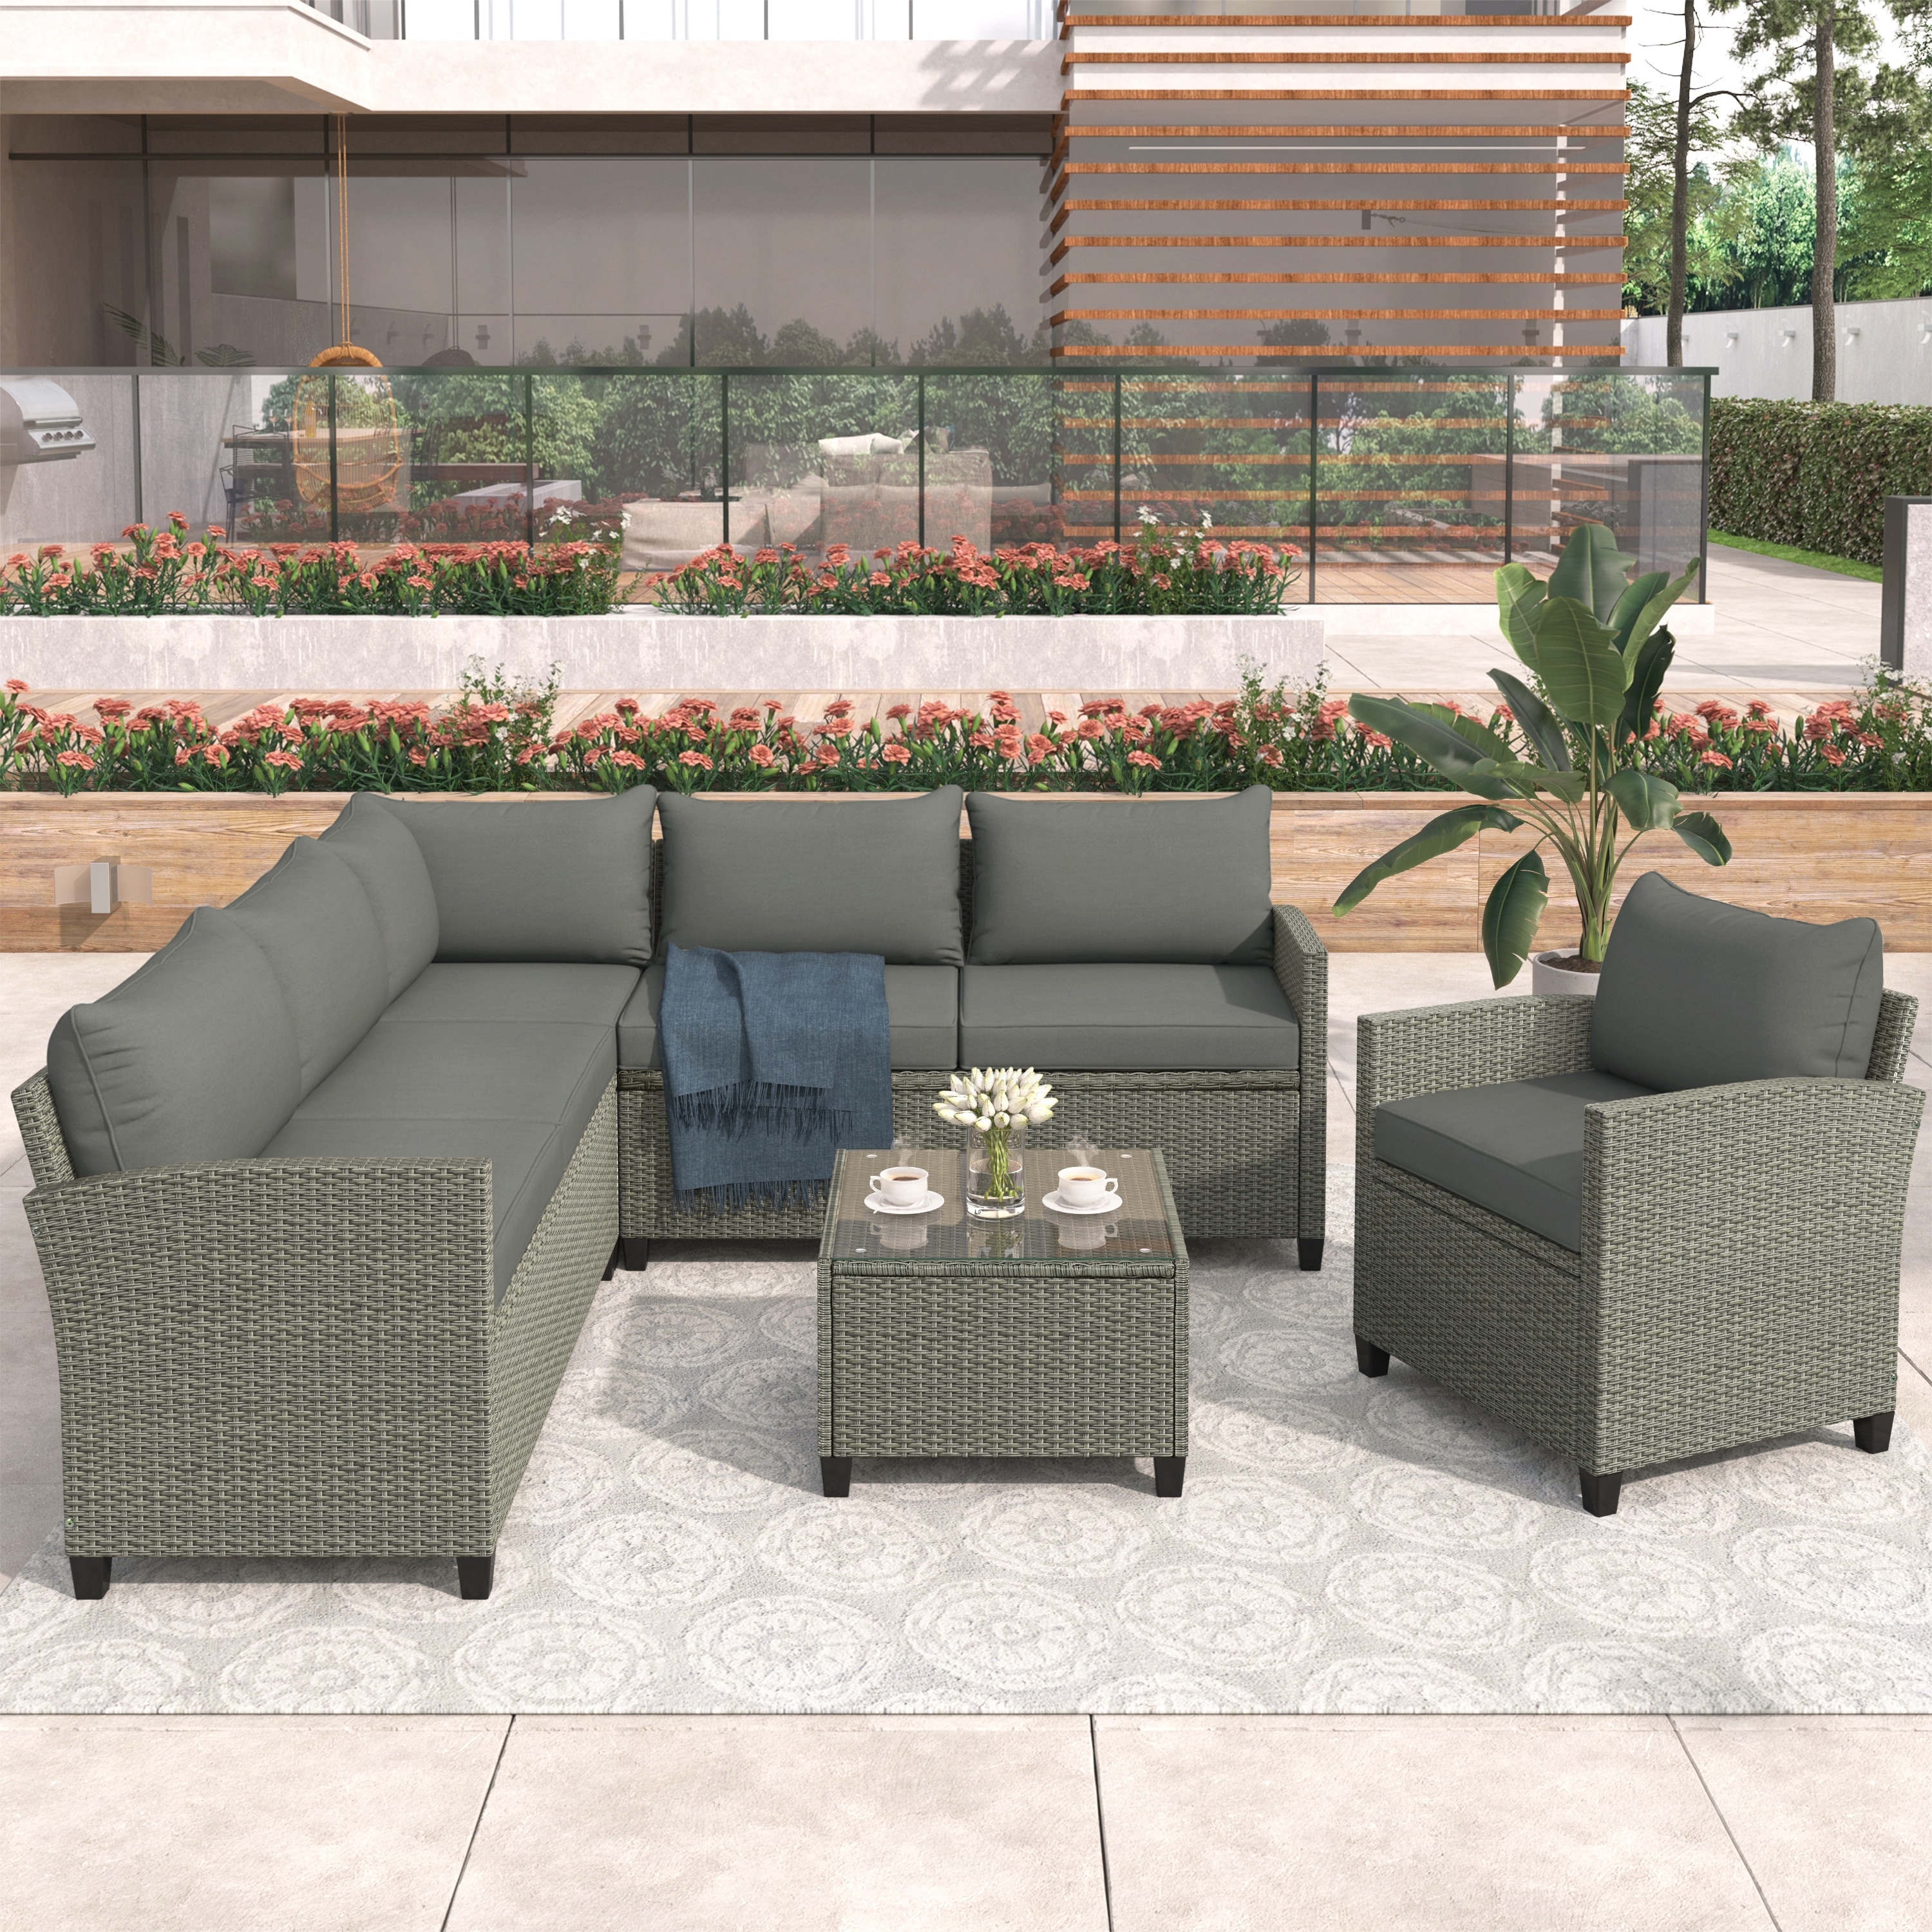 5 Piece Patio Furniture Outdoor Conversation Set Resin Wicker Cushioned Sectional Sofa Set With Coffee Table And Single Chair